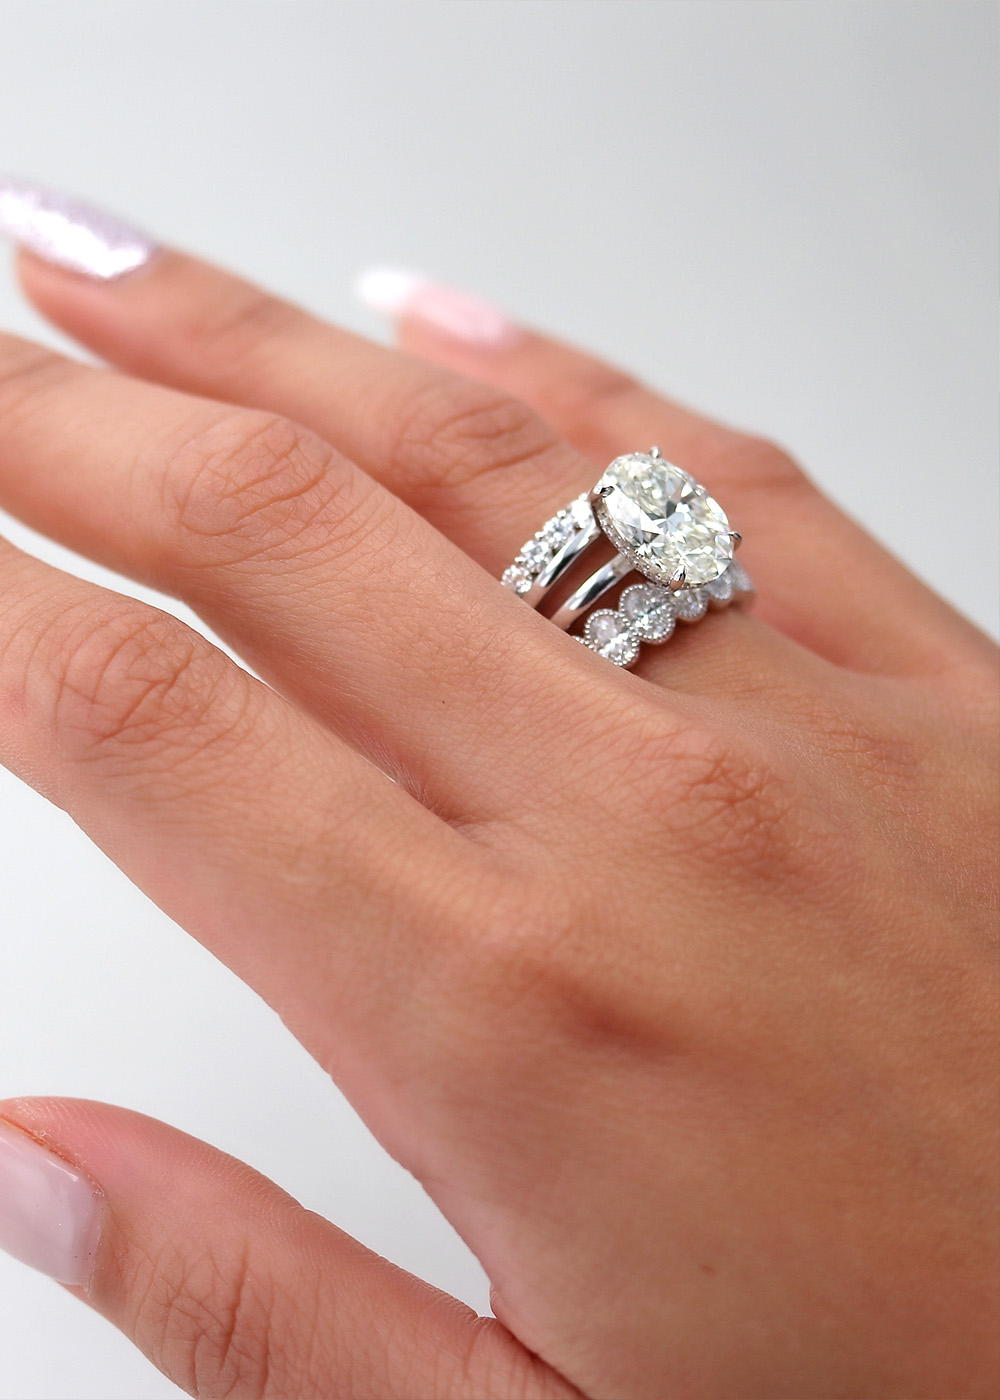 Shop La Mine d'Or Engagement Rings at La Mine d'Or Jewellers Moncton, NB and Halifax, NS